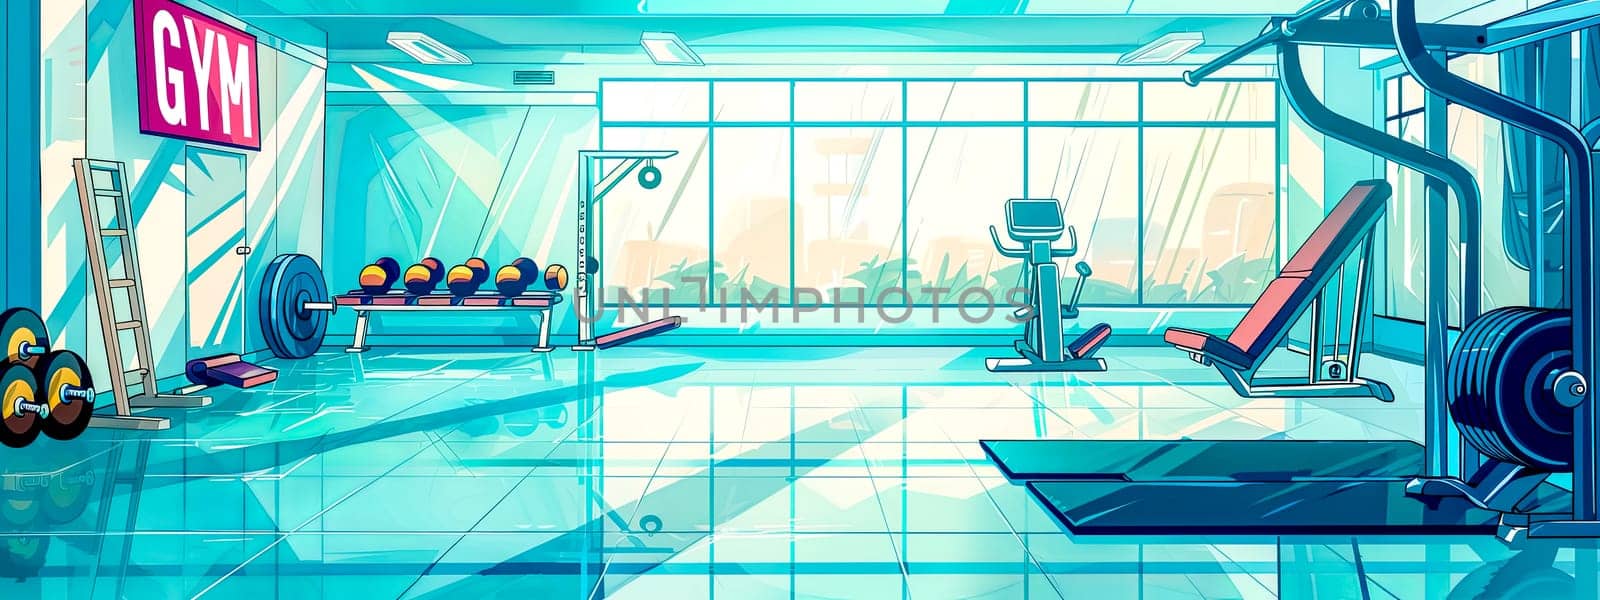 Vibrant gym interior with modern equipment by Edophoto